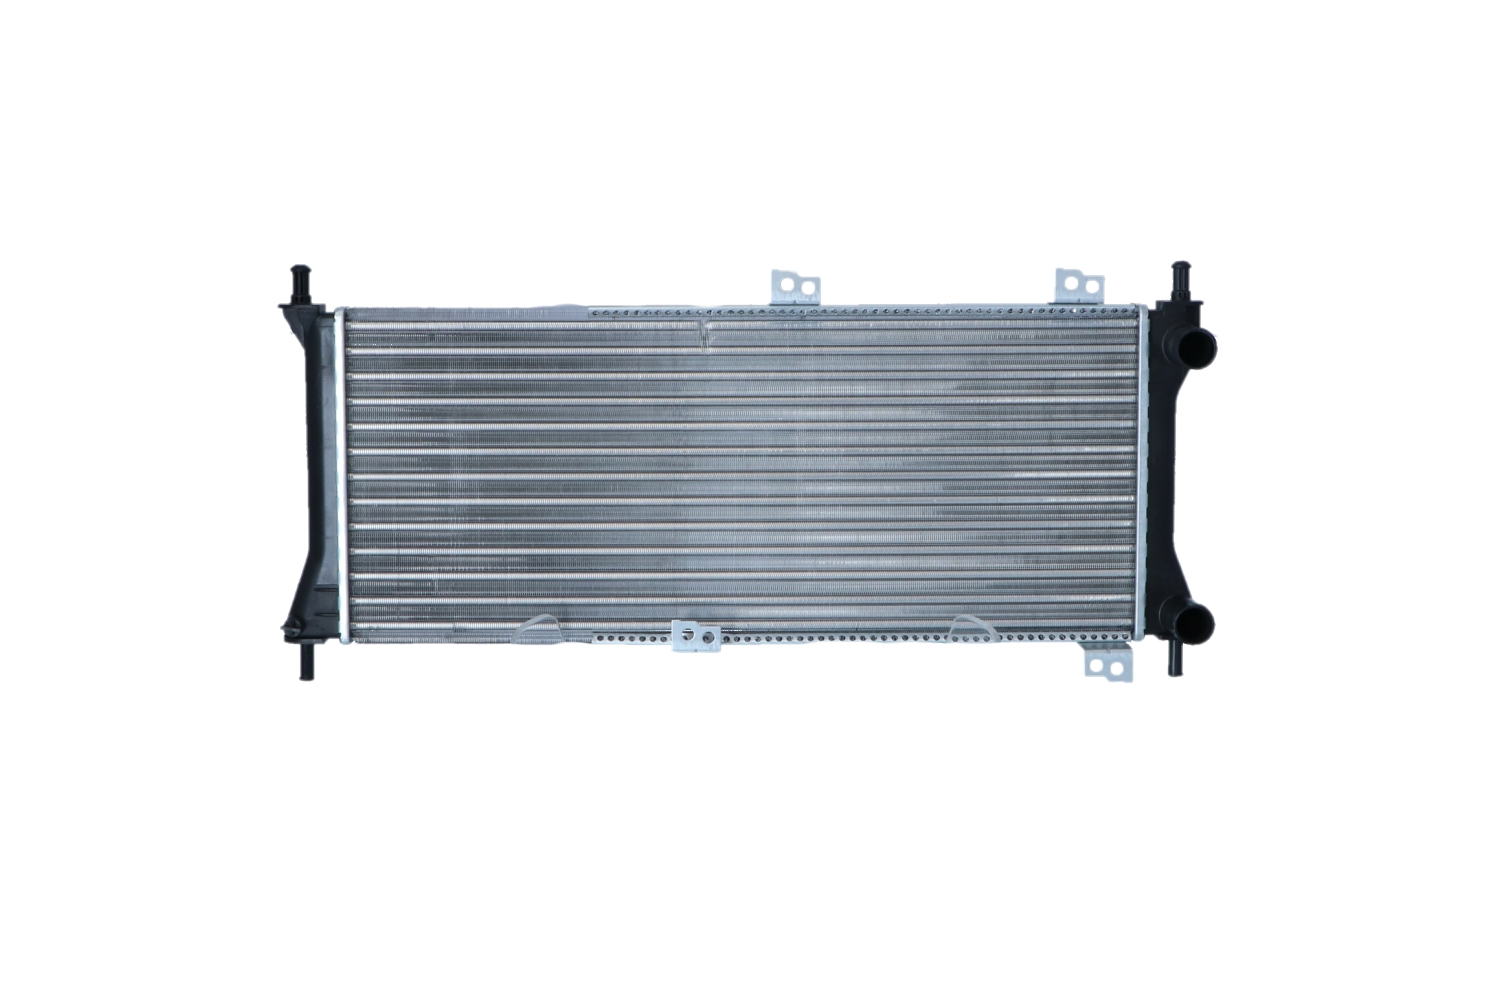 NRF 58225 Engine radiator Aluminium, 580 x 250 x 24 mm, Mechanically jointed cooling fins